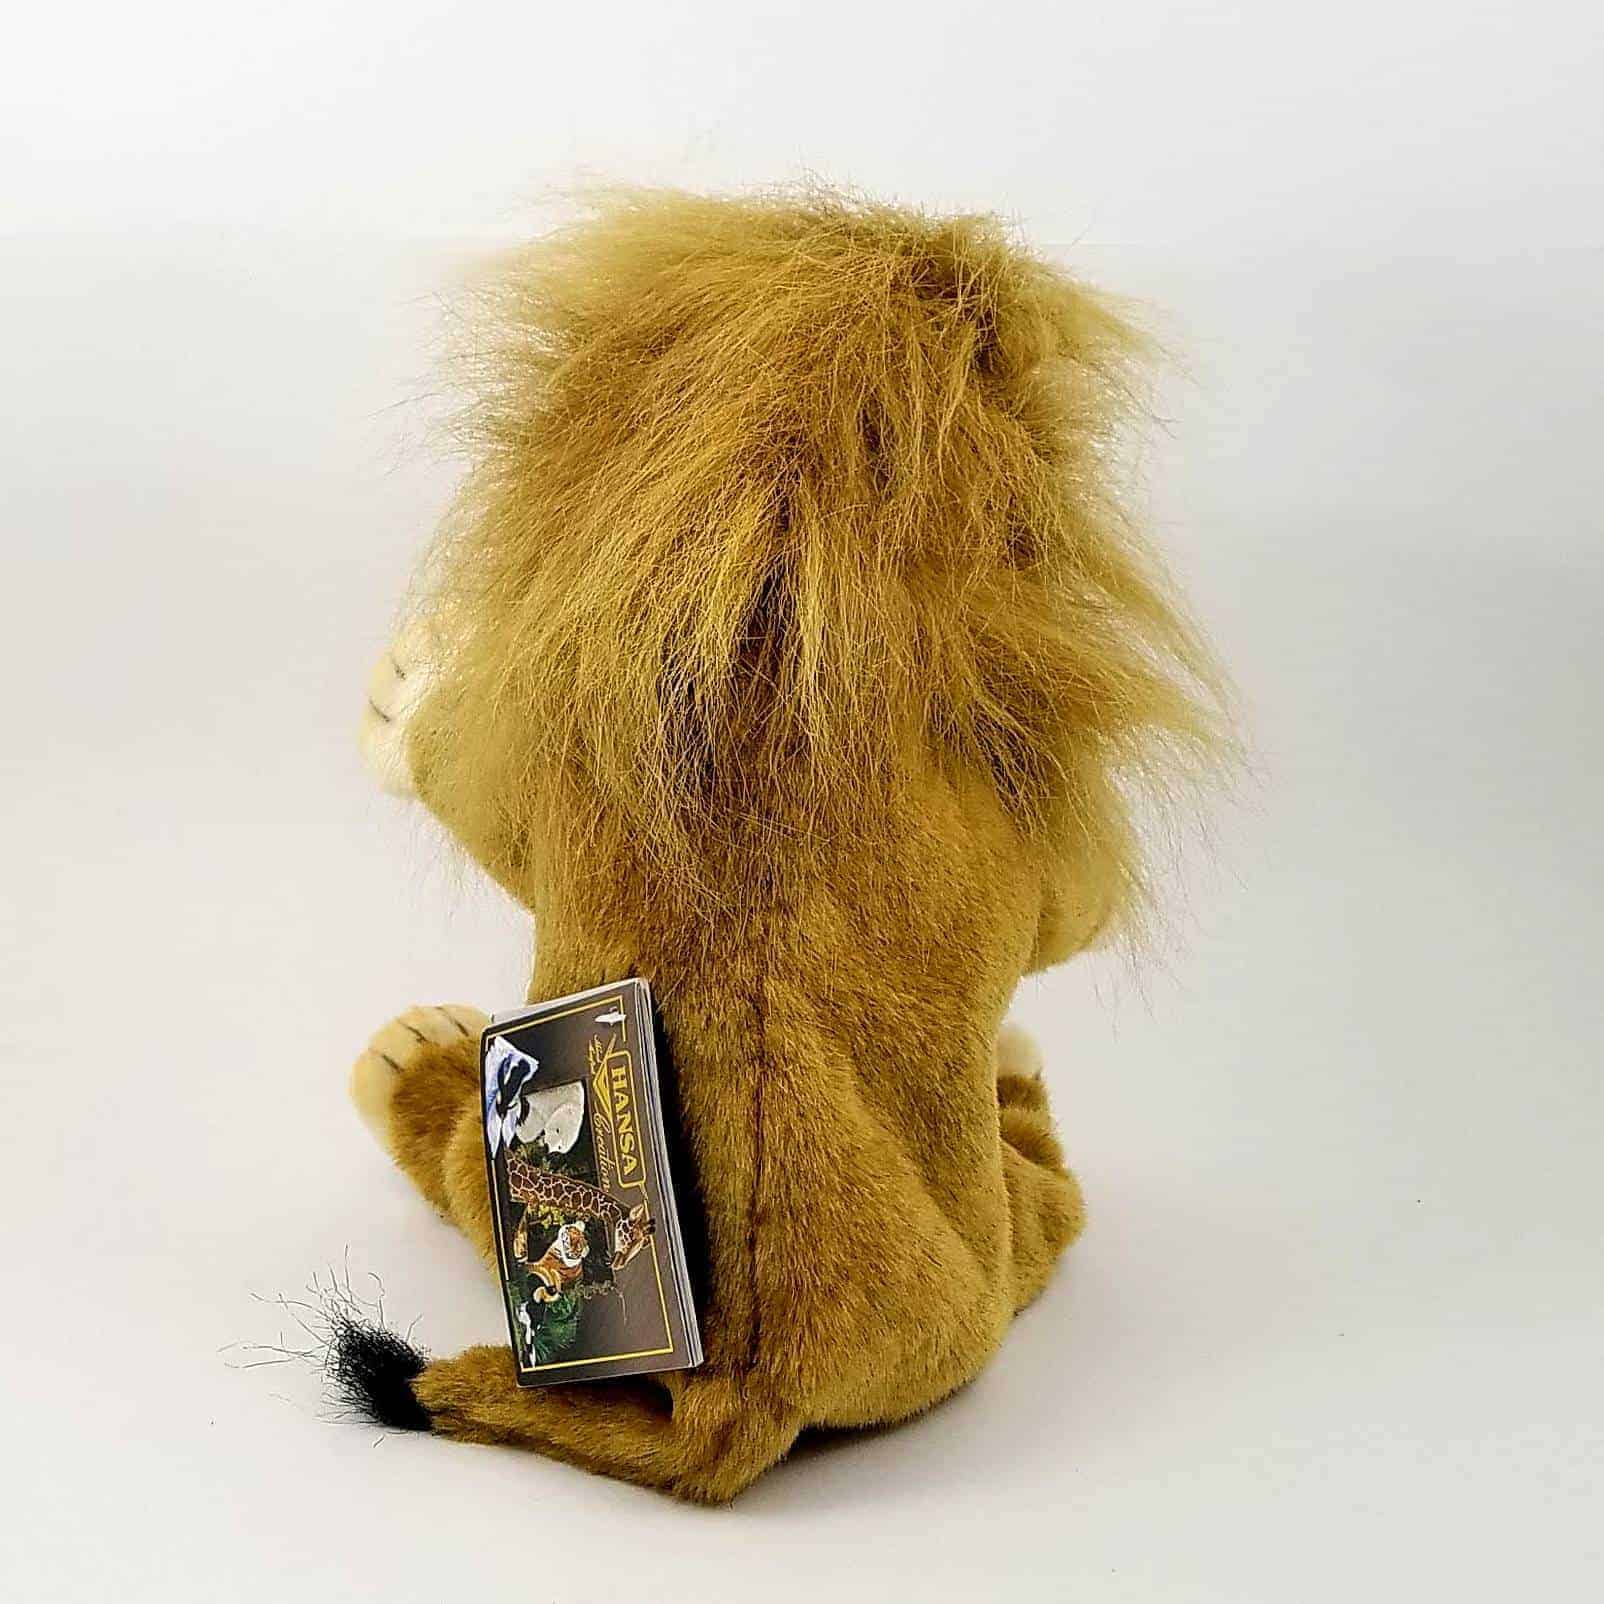 This Lion Hand Puppet by Hansa True to Life Looking Soft Plush Animal Learning Toy is made with love by Premier Homegoods! Shop more unique gift ideas today with Spots Initiatives, the best way to support creators.